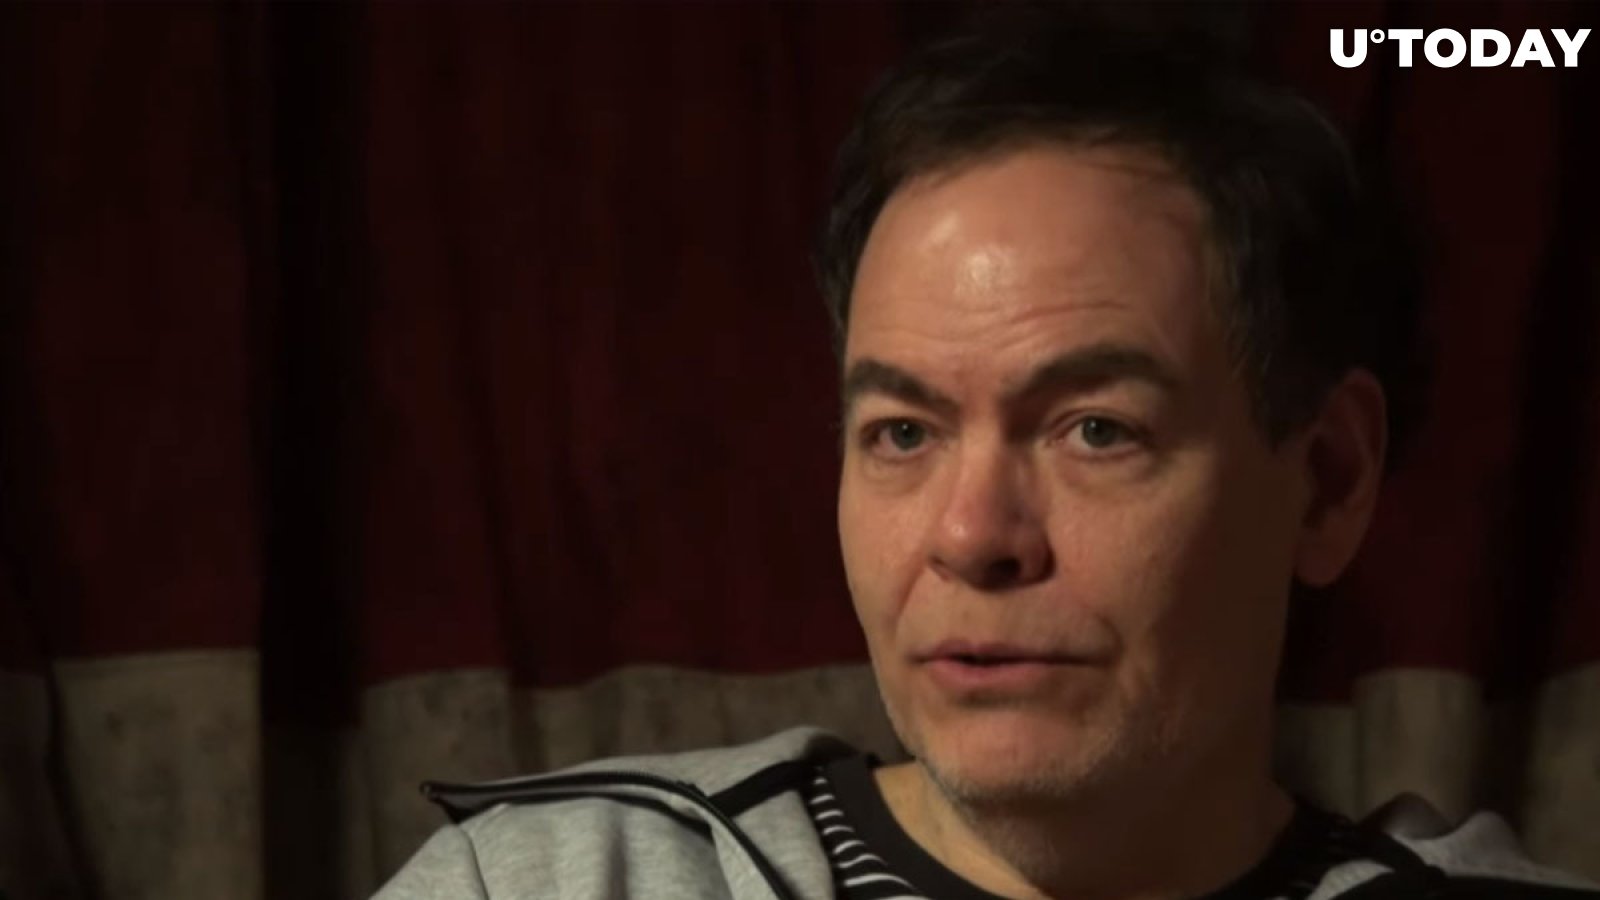 Max Keiser Shares His Take on Why Bitcoin Is Trading Higher